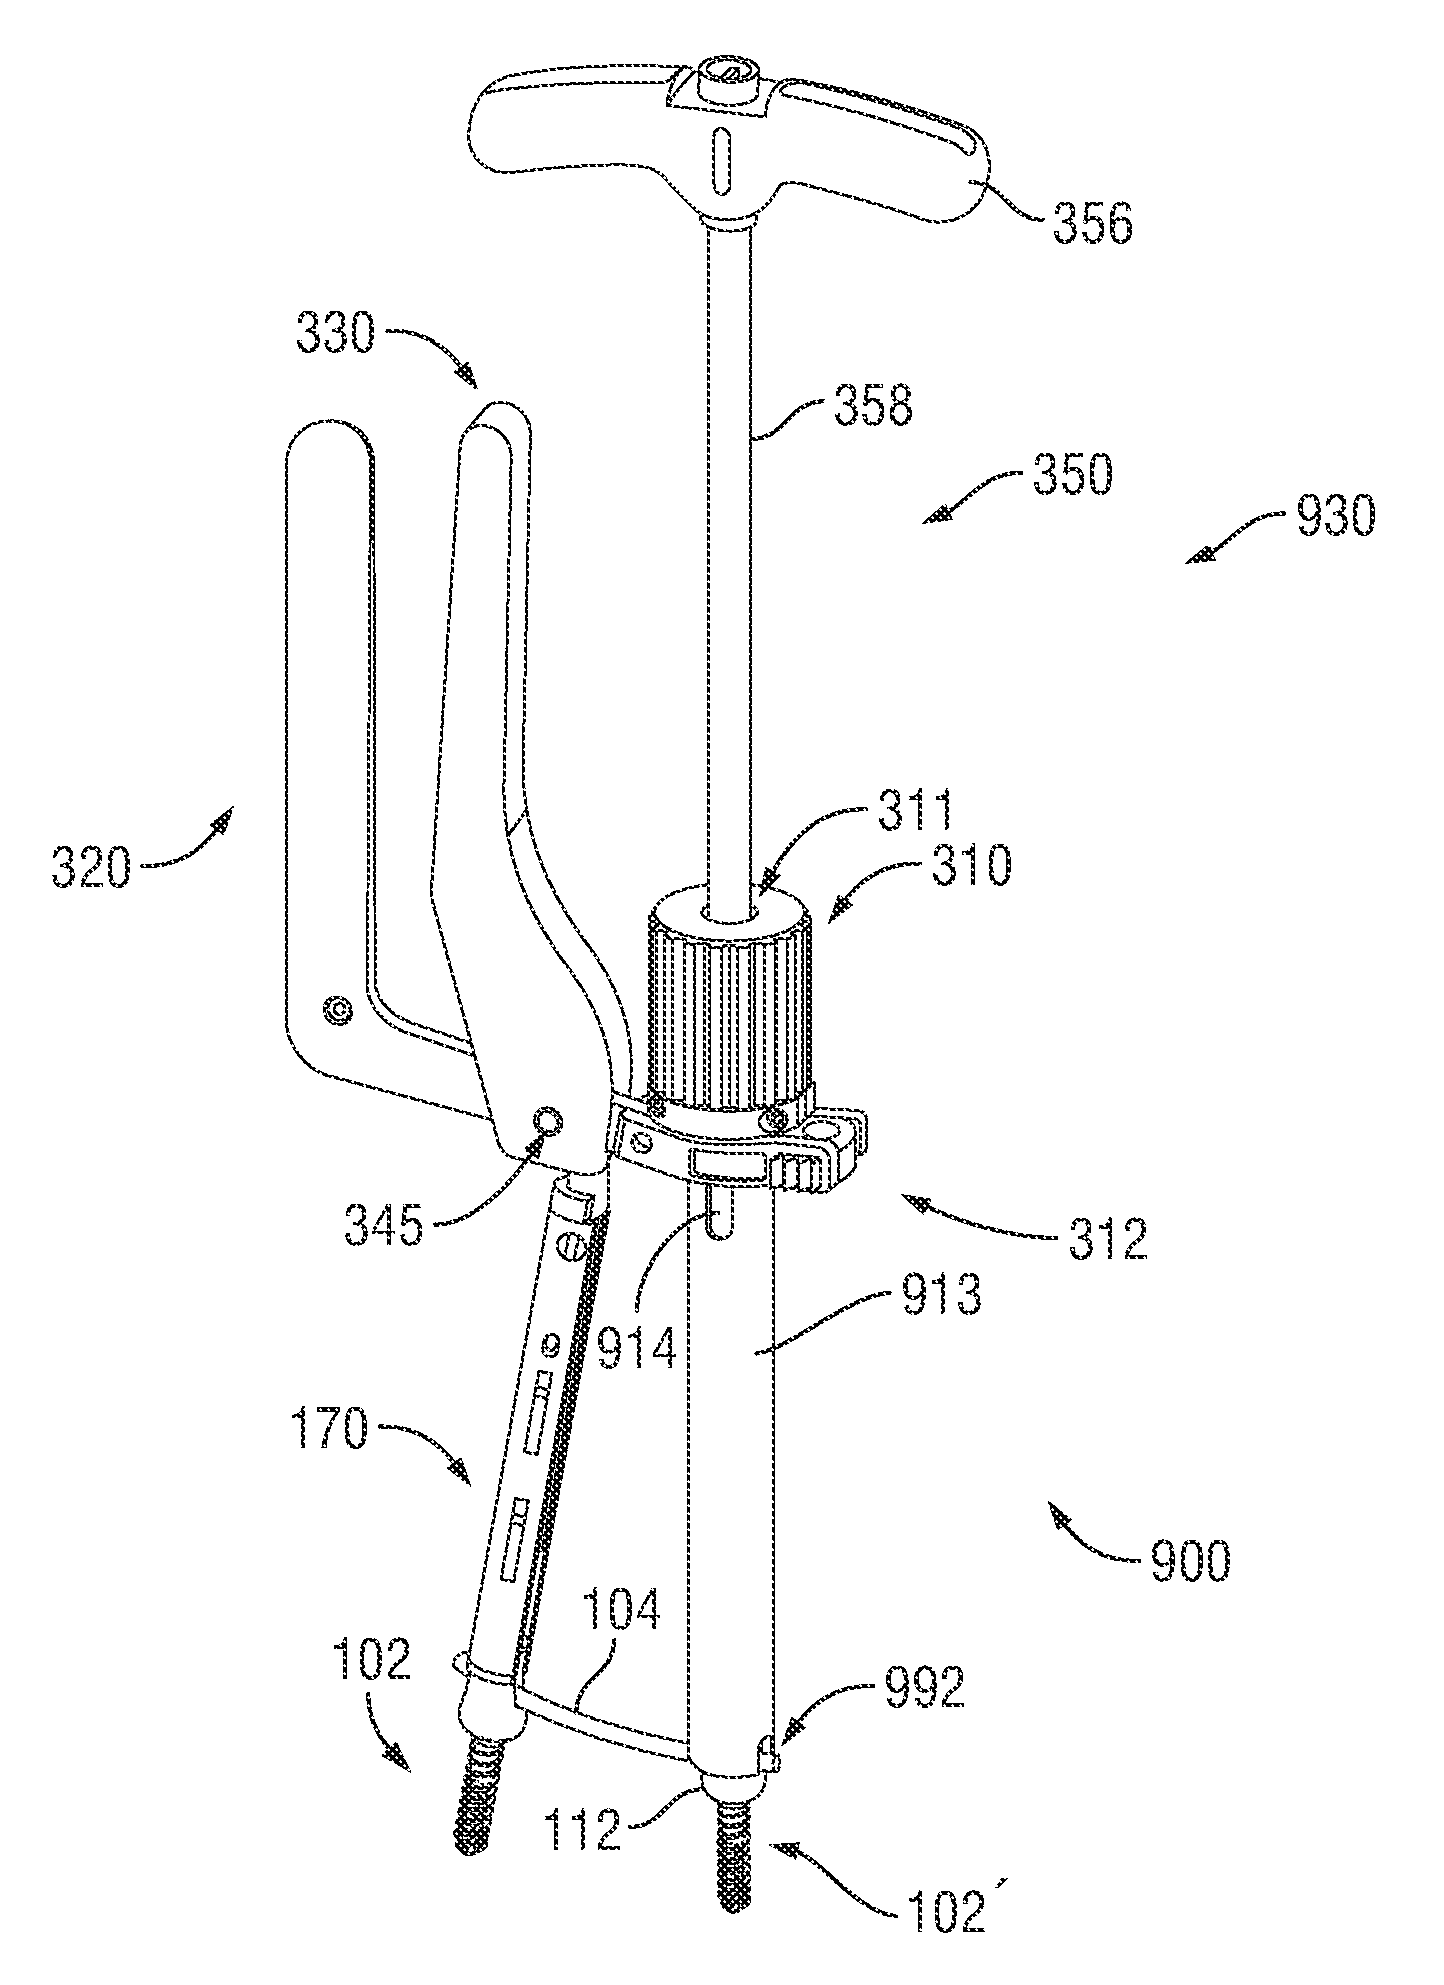 Surgical instrument with integrated compression and distraction mechanisms